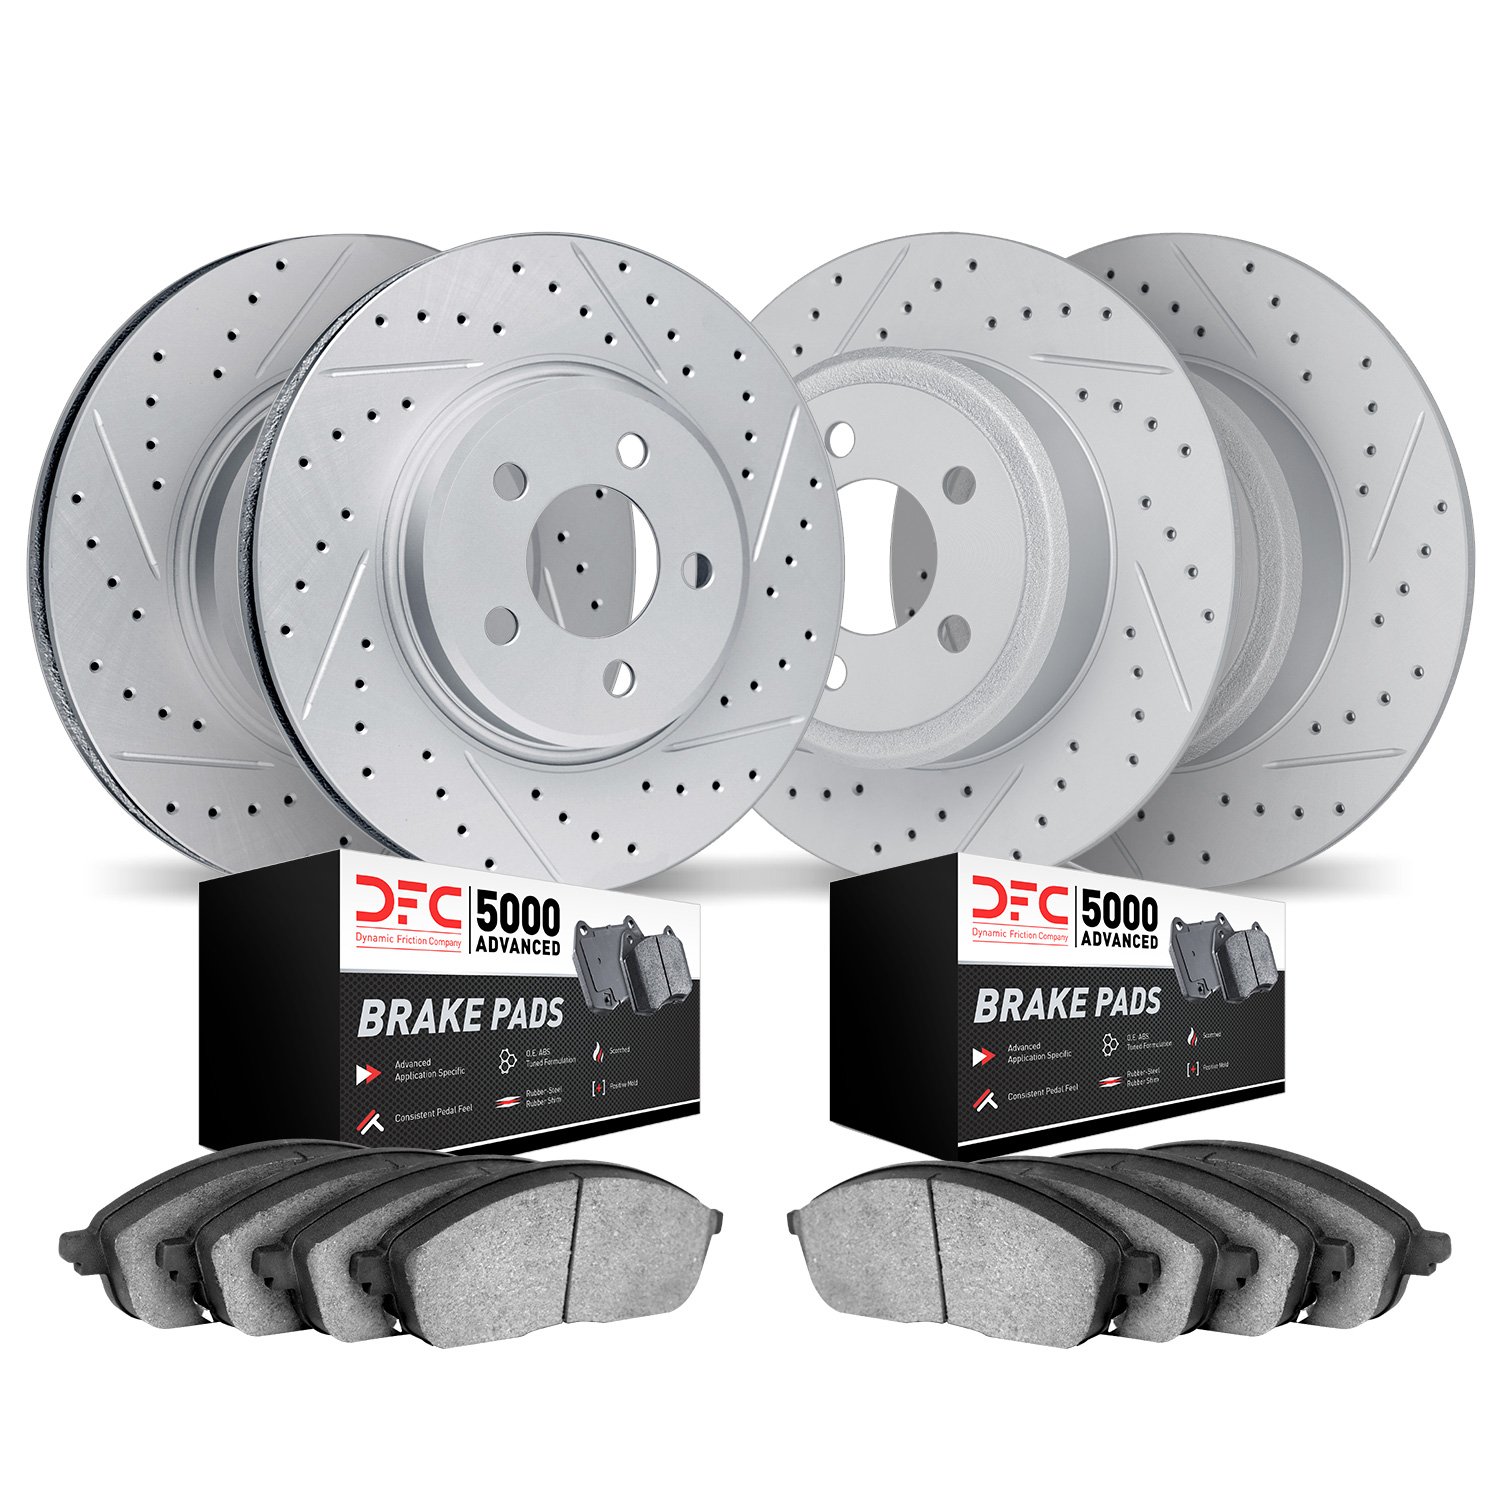 2504-75001 Geoperformance Drilled/Slotted Rotors w/5000 Advanced Brake Pads Kit, 1998-2010 Lexus/Toyota/Scion, Position: Front a